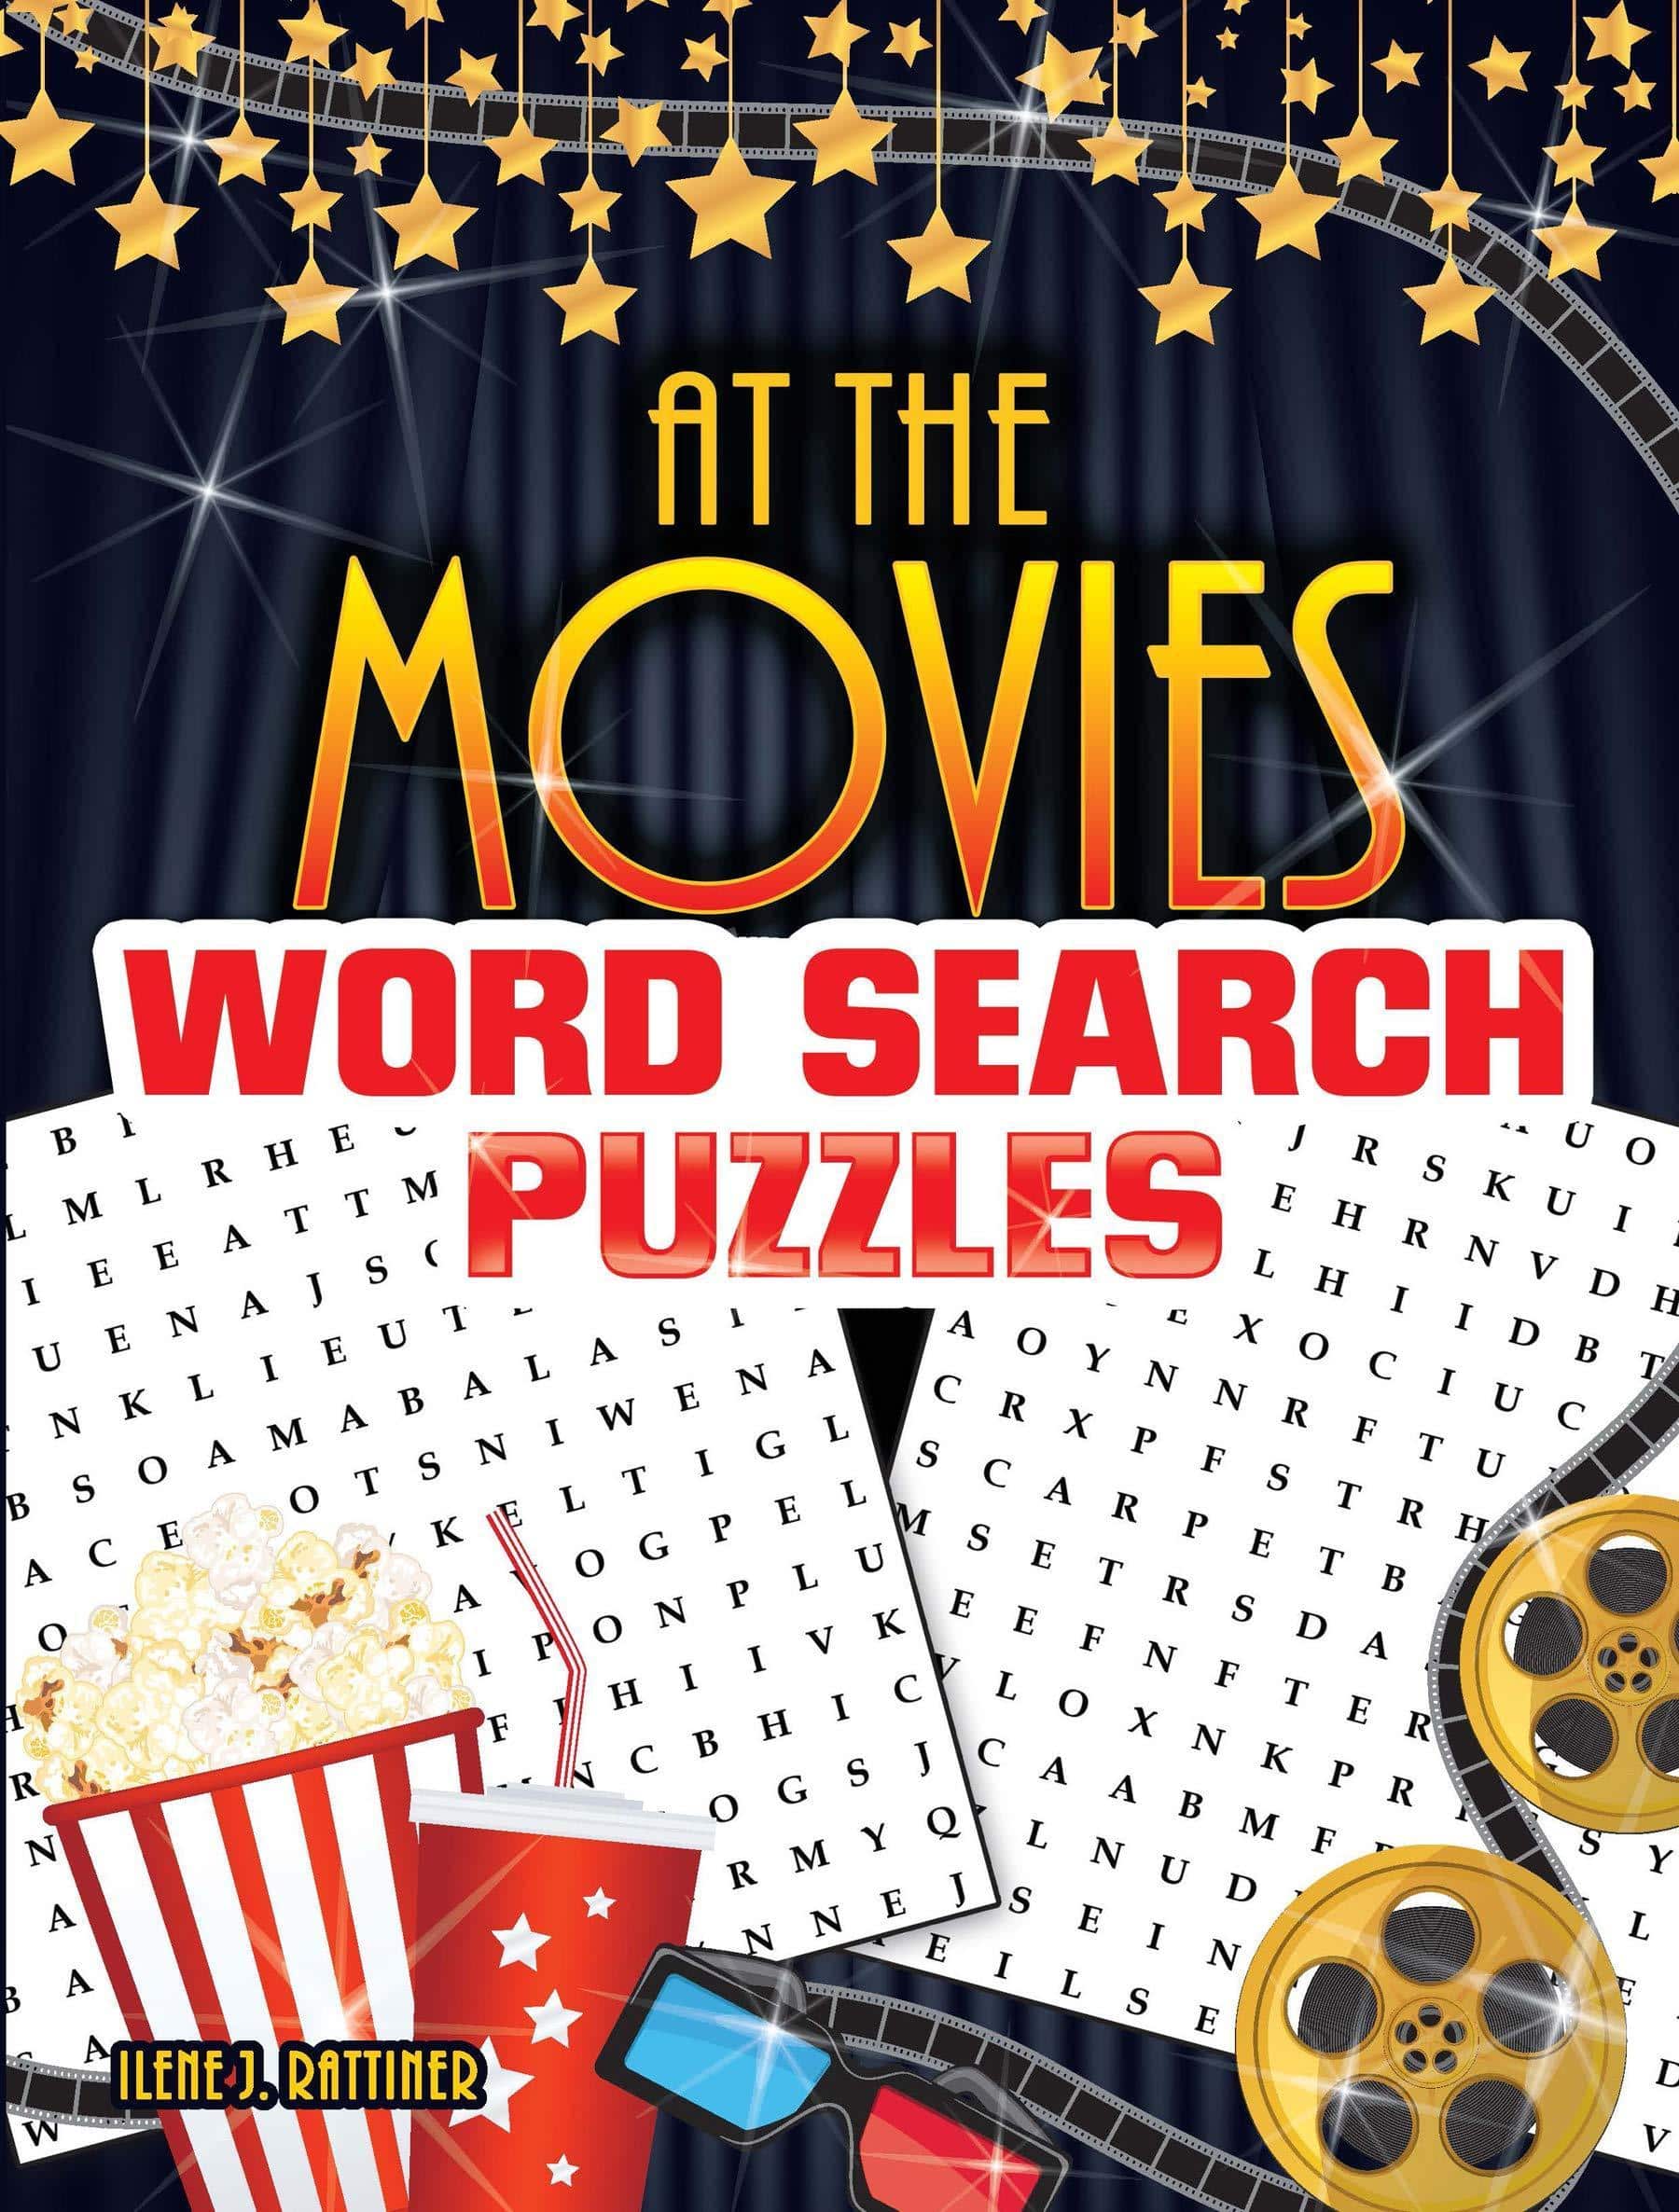 At the Movies Word Search Puzzles - SureShot Books Publishing LLC